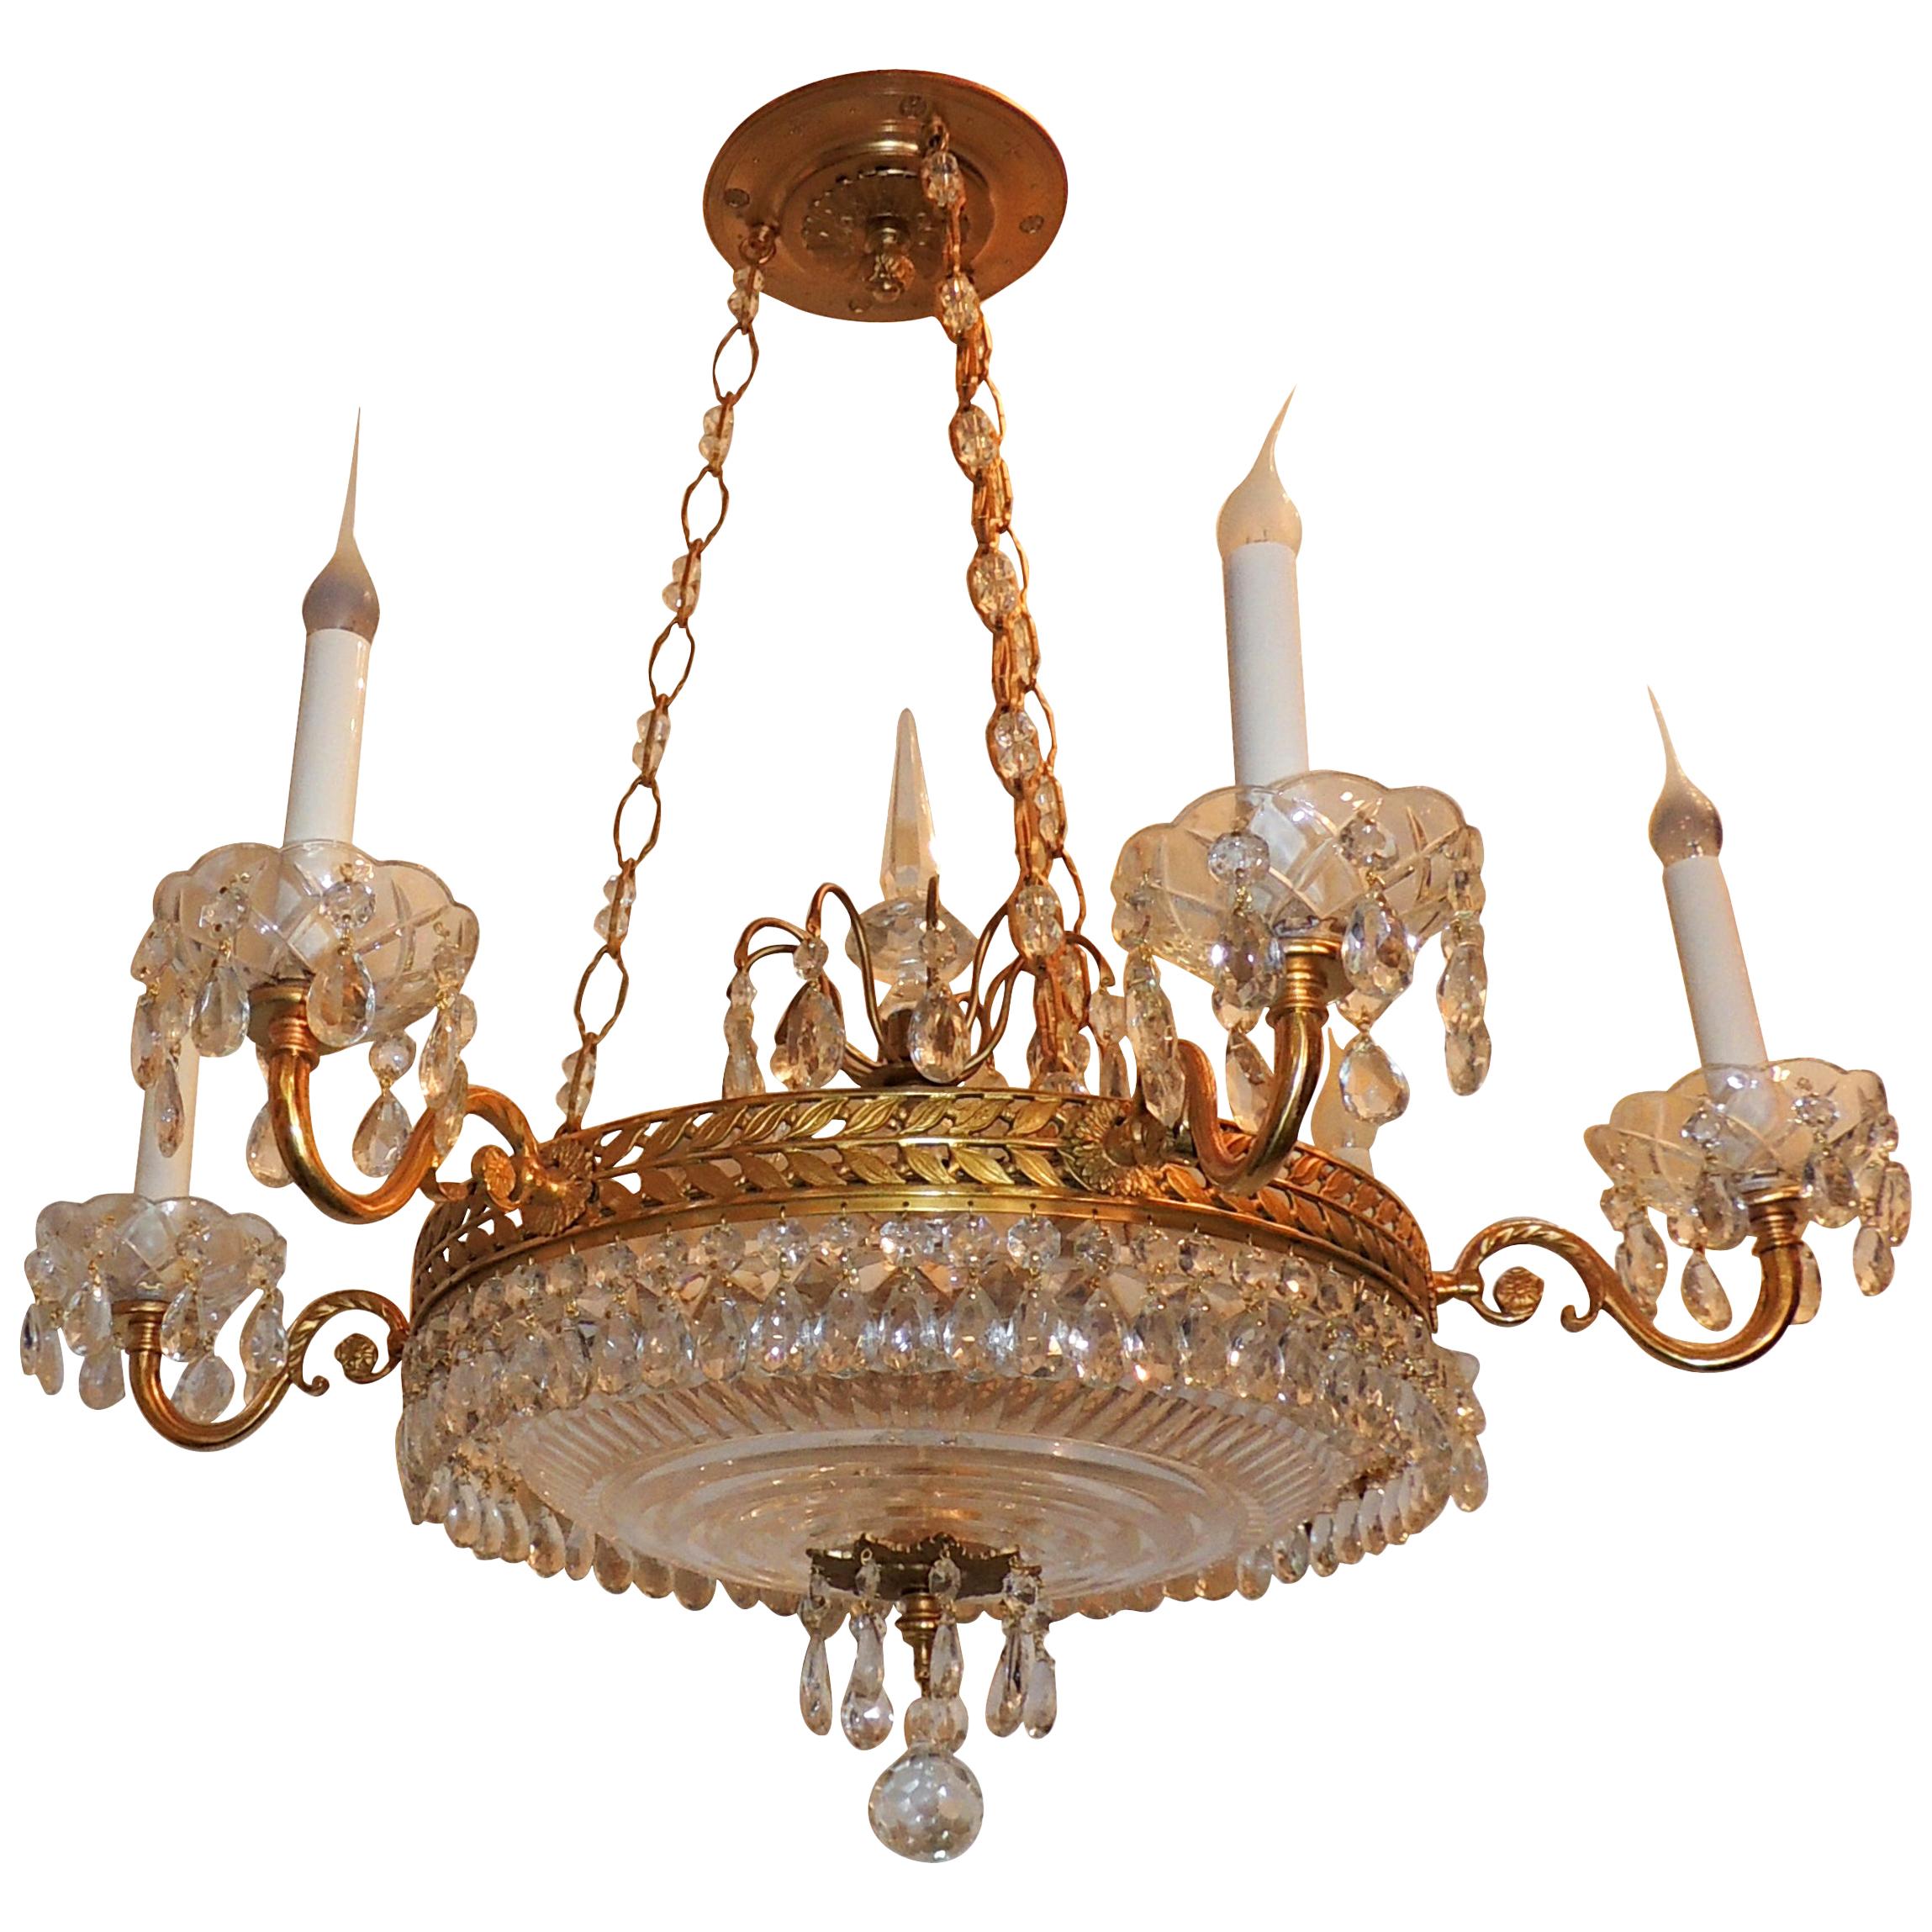 Wonderful French Dore Bronze Neoclassical Baltic Crystal Bowl Empire Chandelier